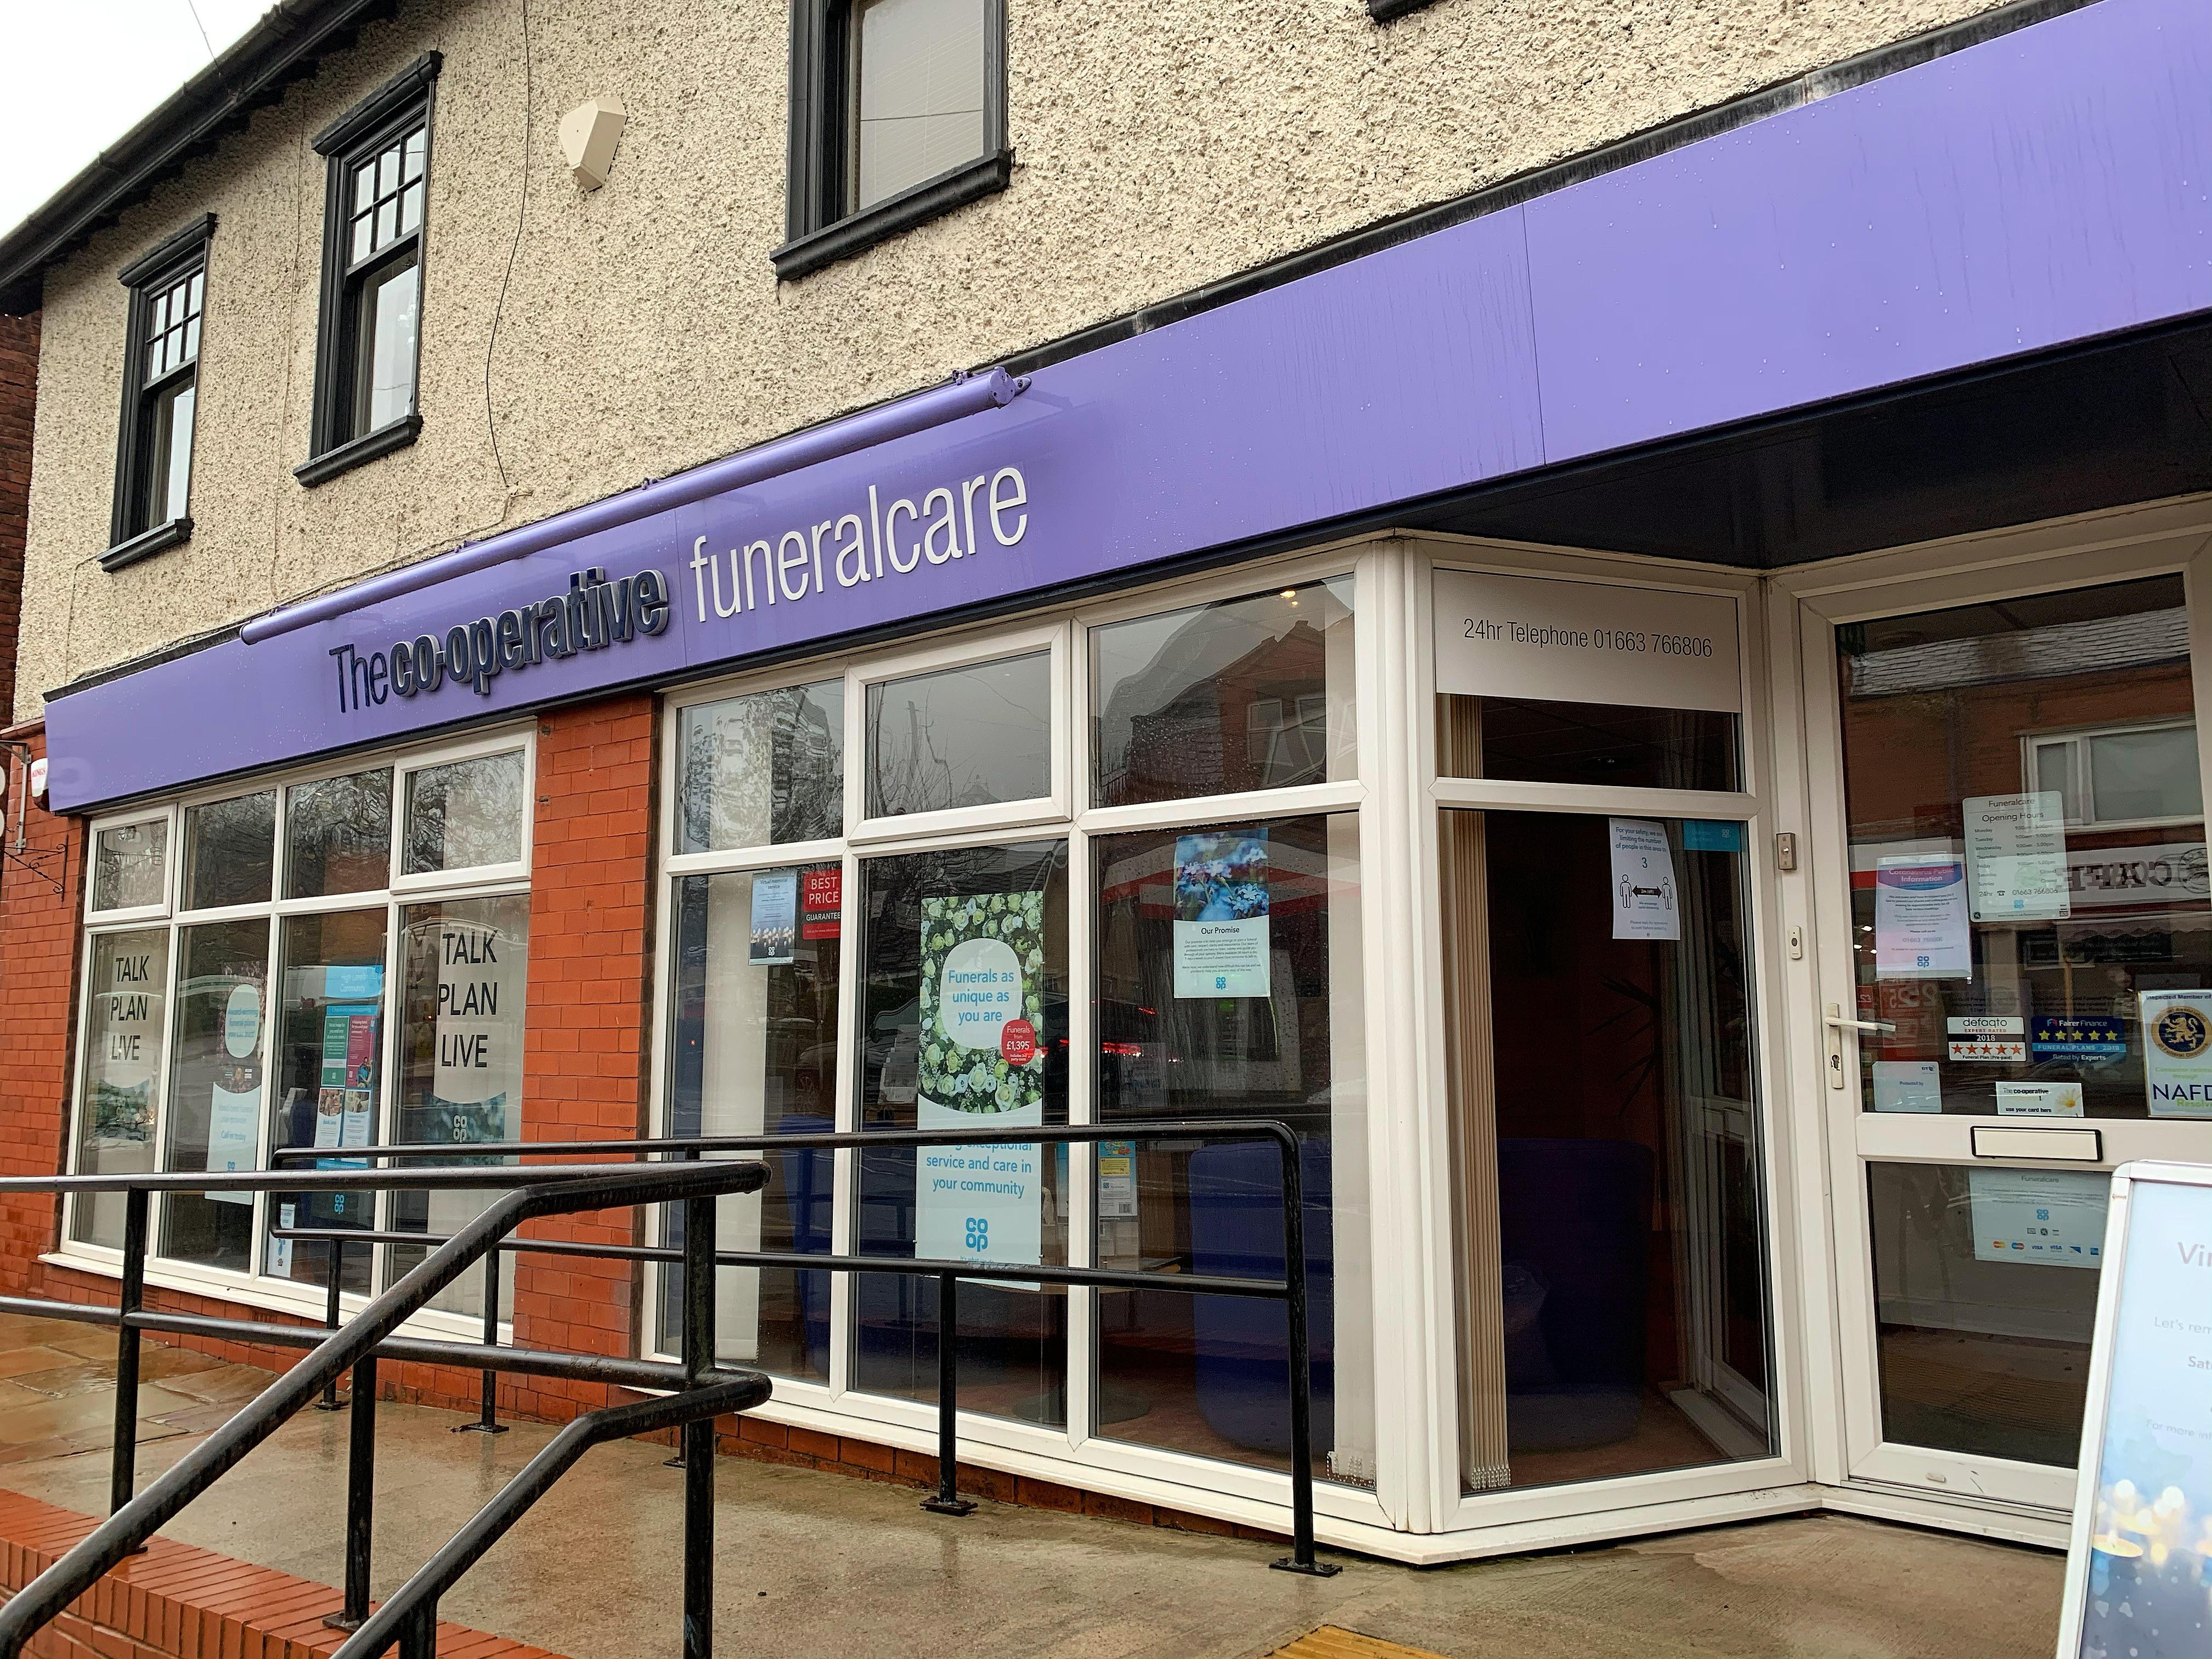 Co-op Funeralcare, High Lane Stockport 01663 766806